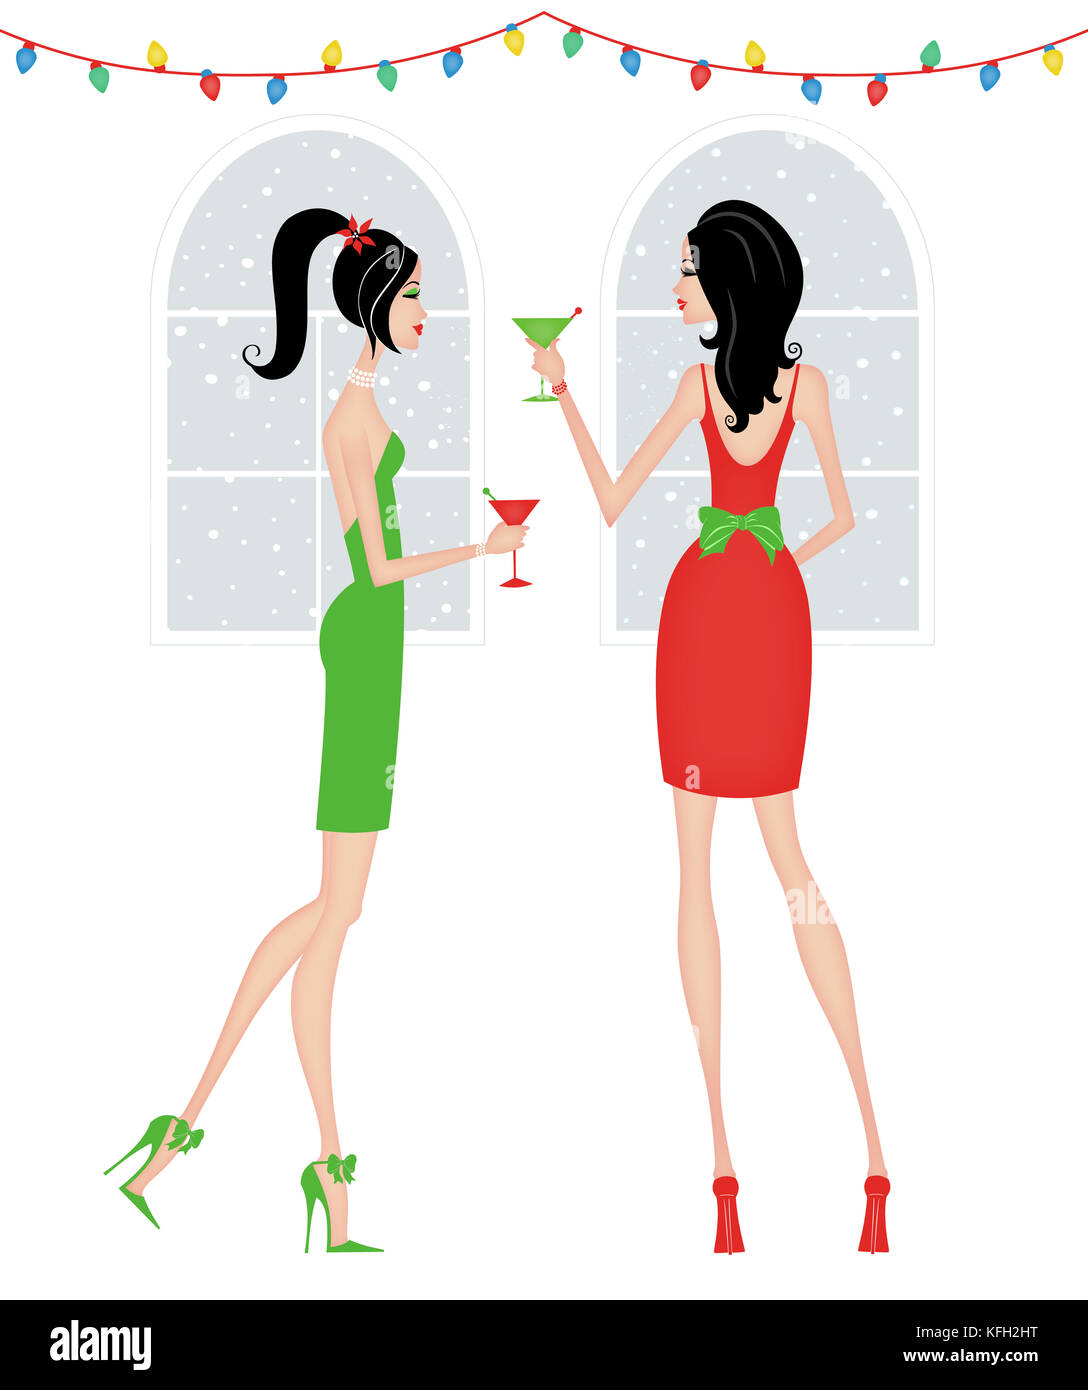 Two chic women at a dressy festive holiday party Stock Photo